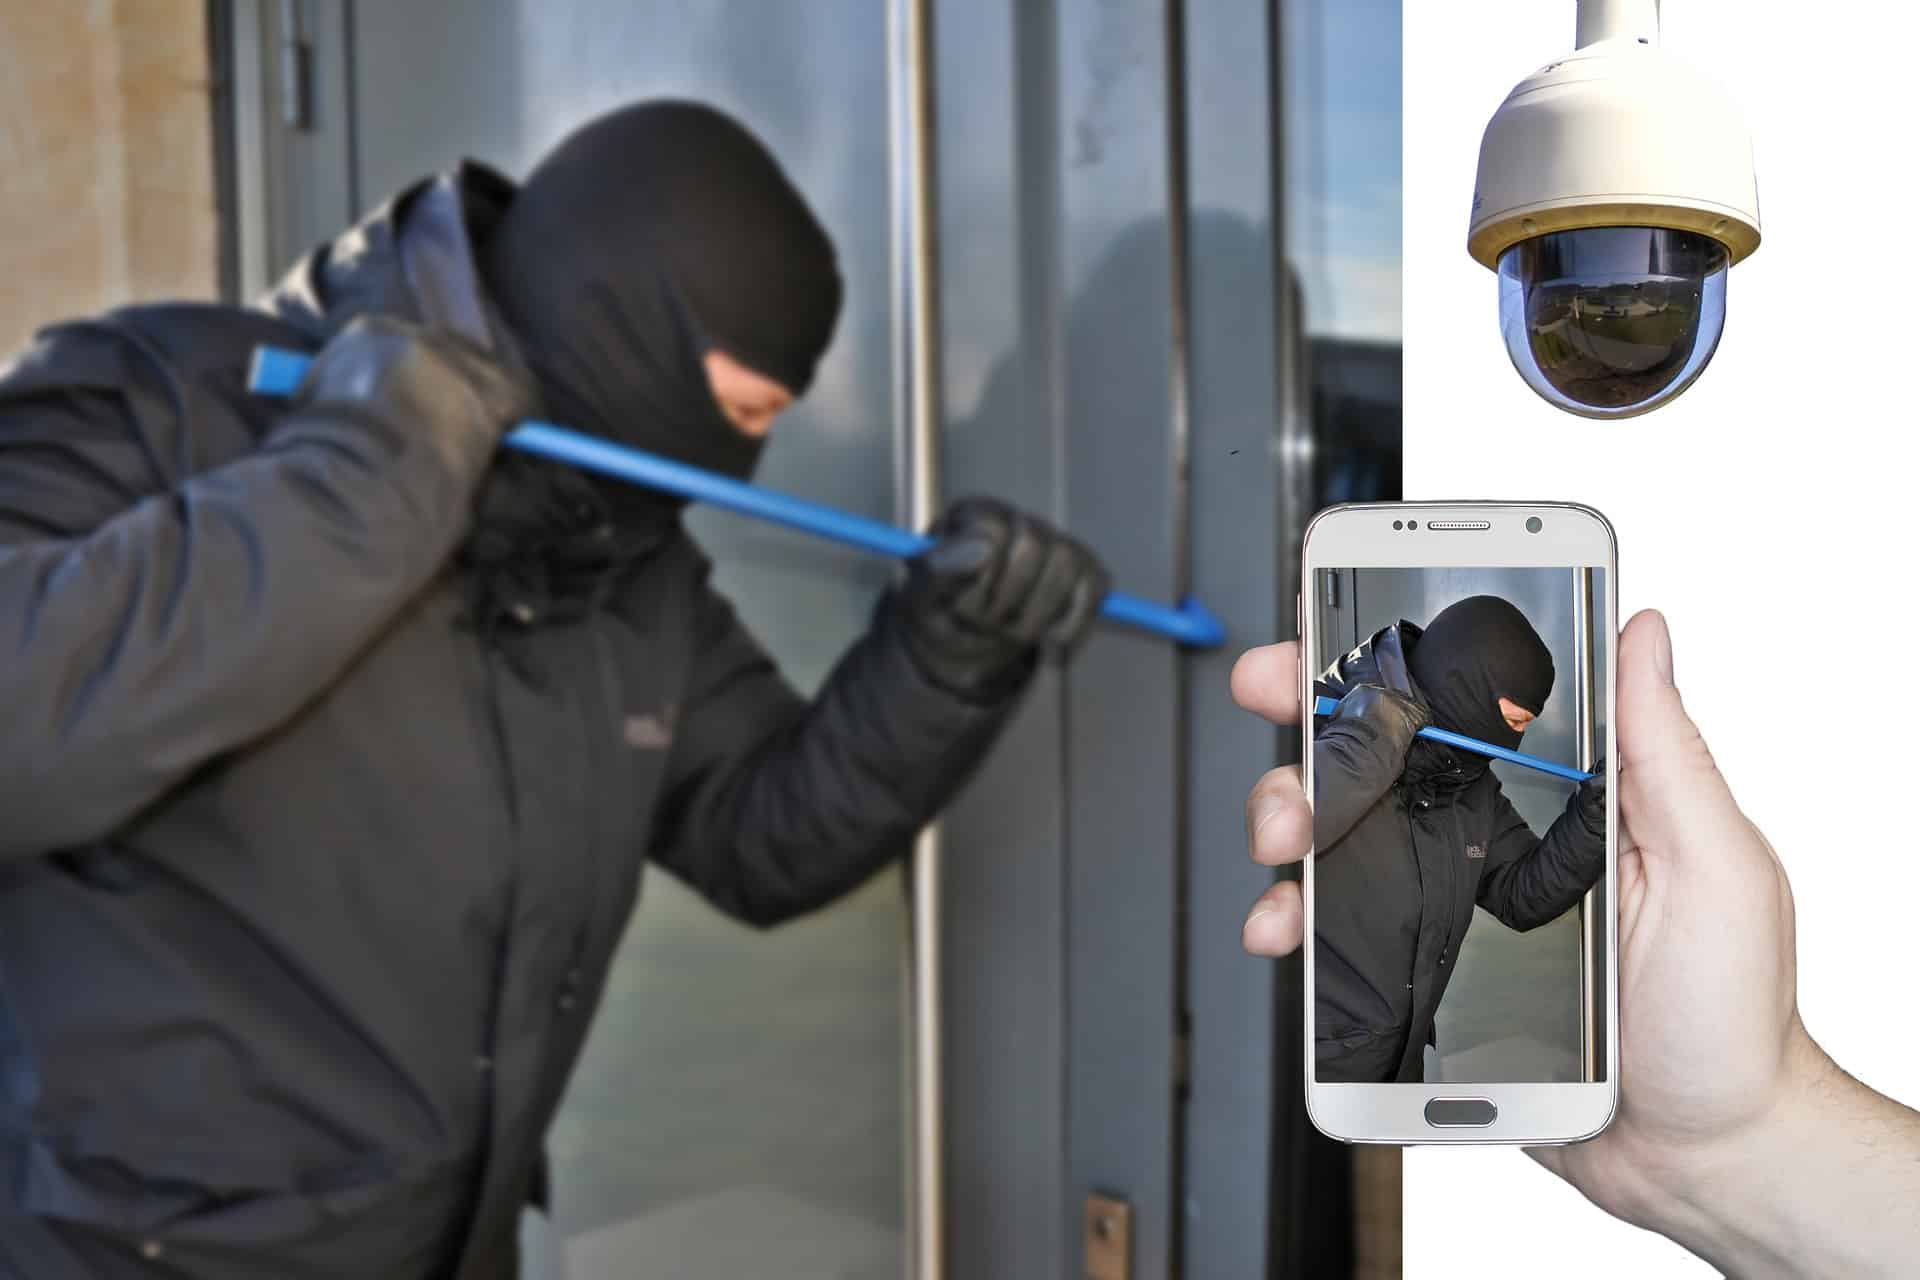 December is also a festive month for burglars